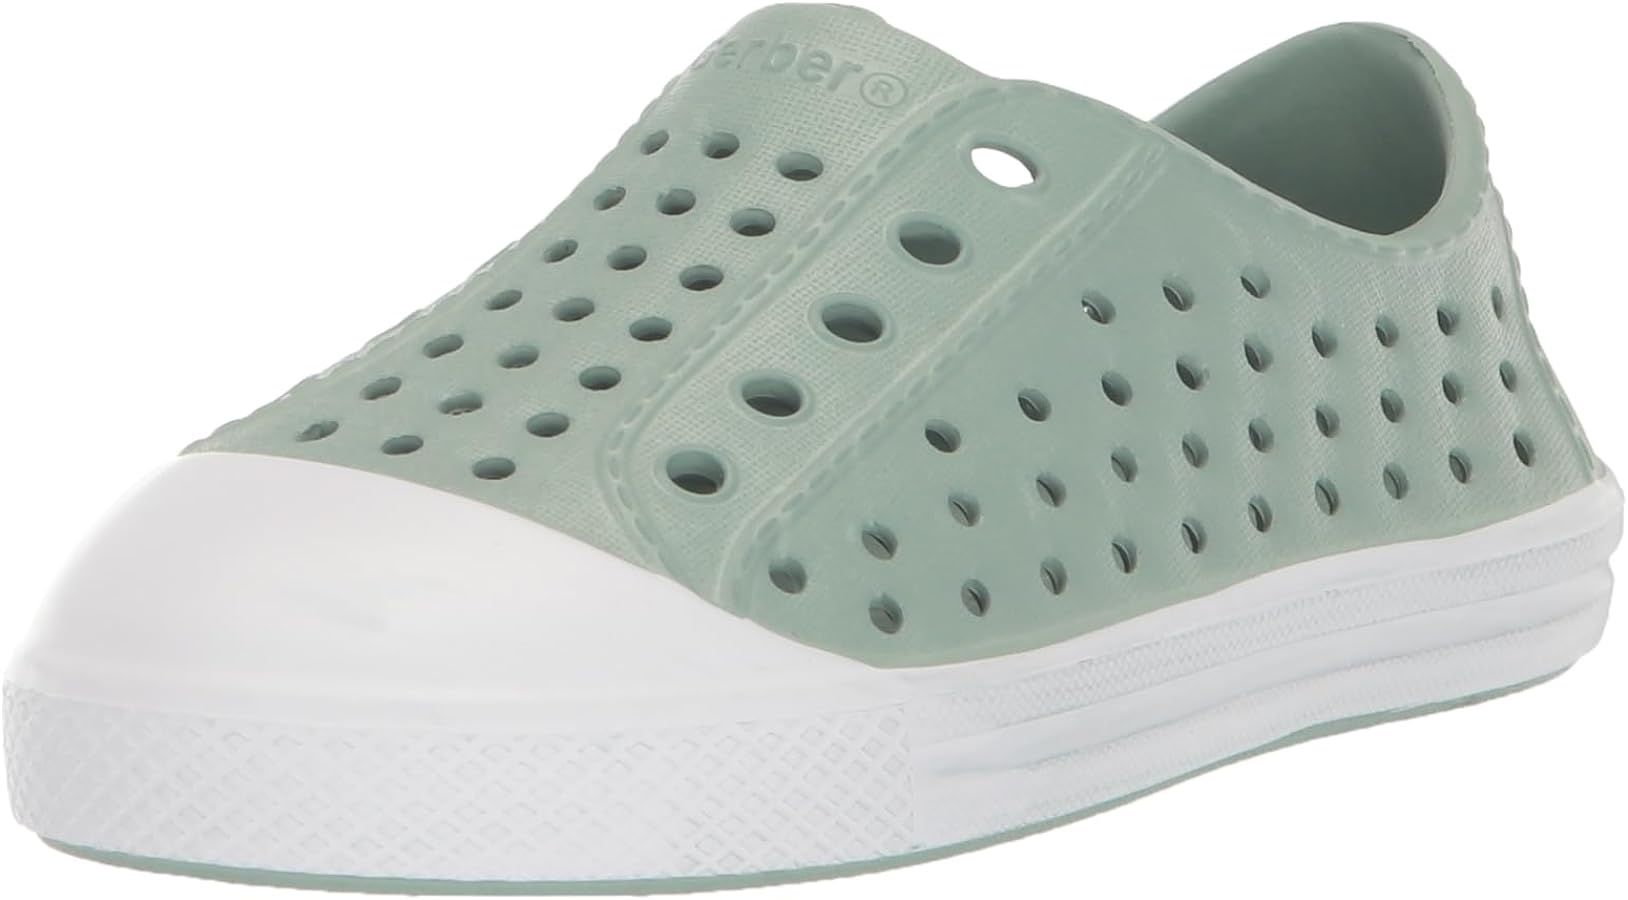 Gerber Unisex-Child Boys and Girls Toddler Light-Weight Pull-on Sneaker Crib Shoe | Amazon (US)